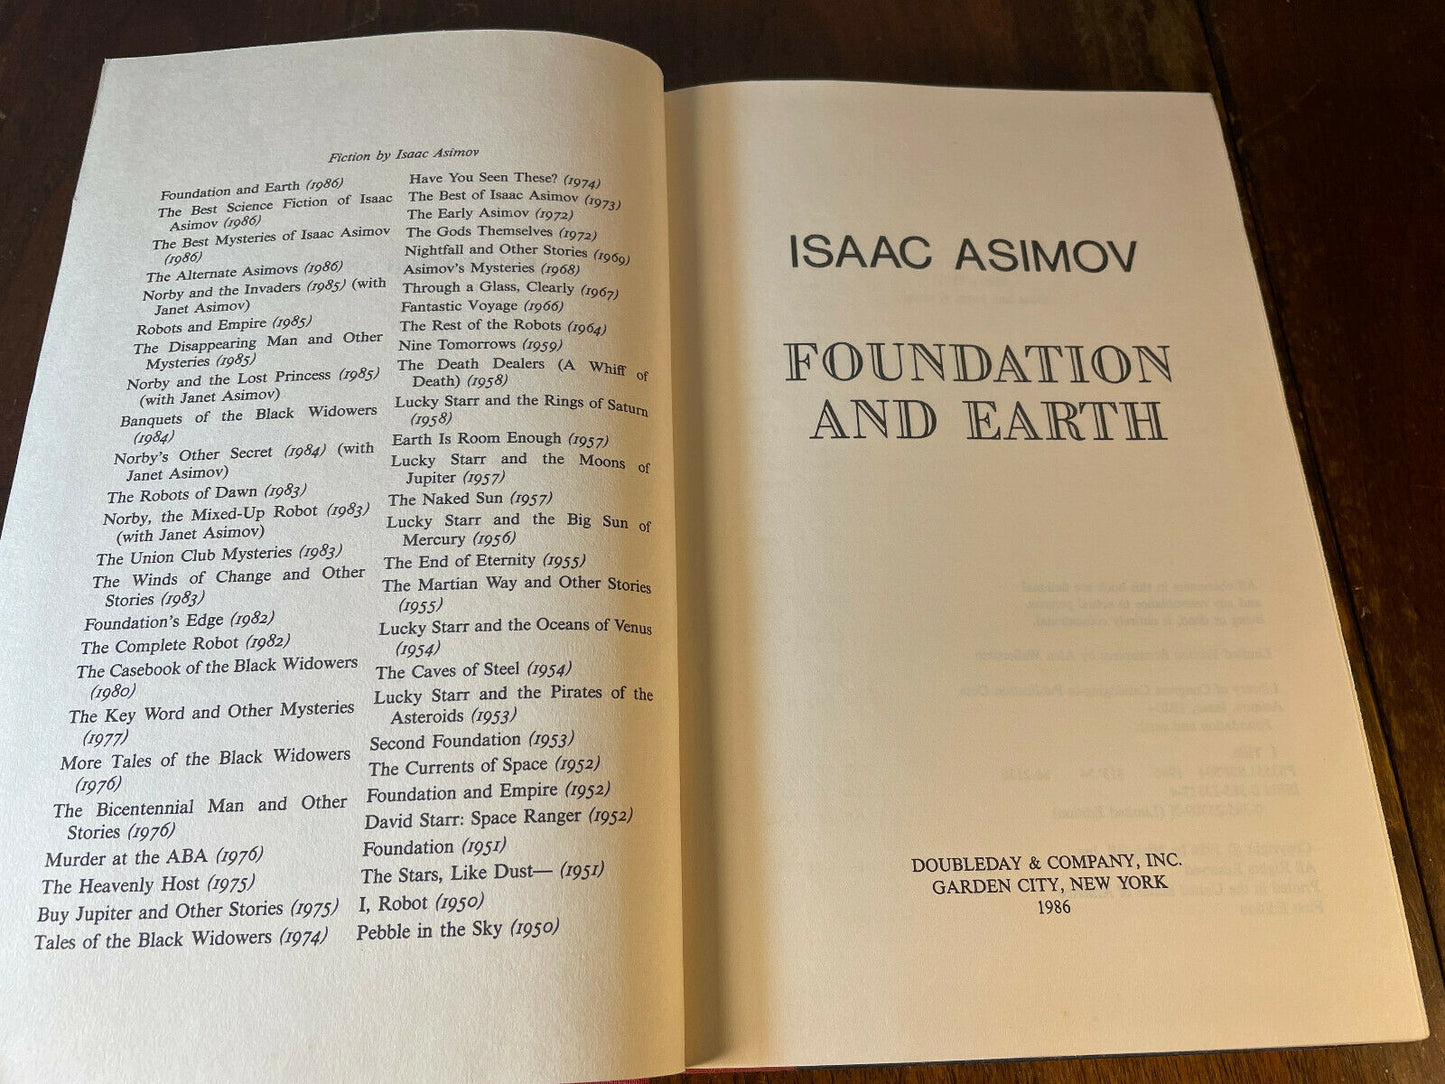 Foundation and Earth by Isaac Asimov (1986, Hardcover, First Edition) (C10)